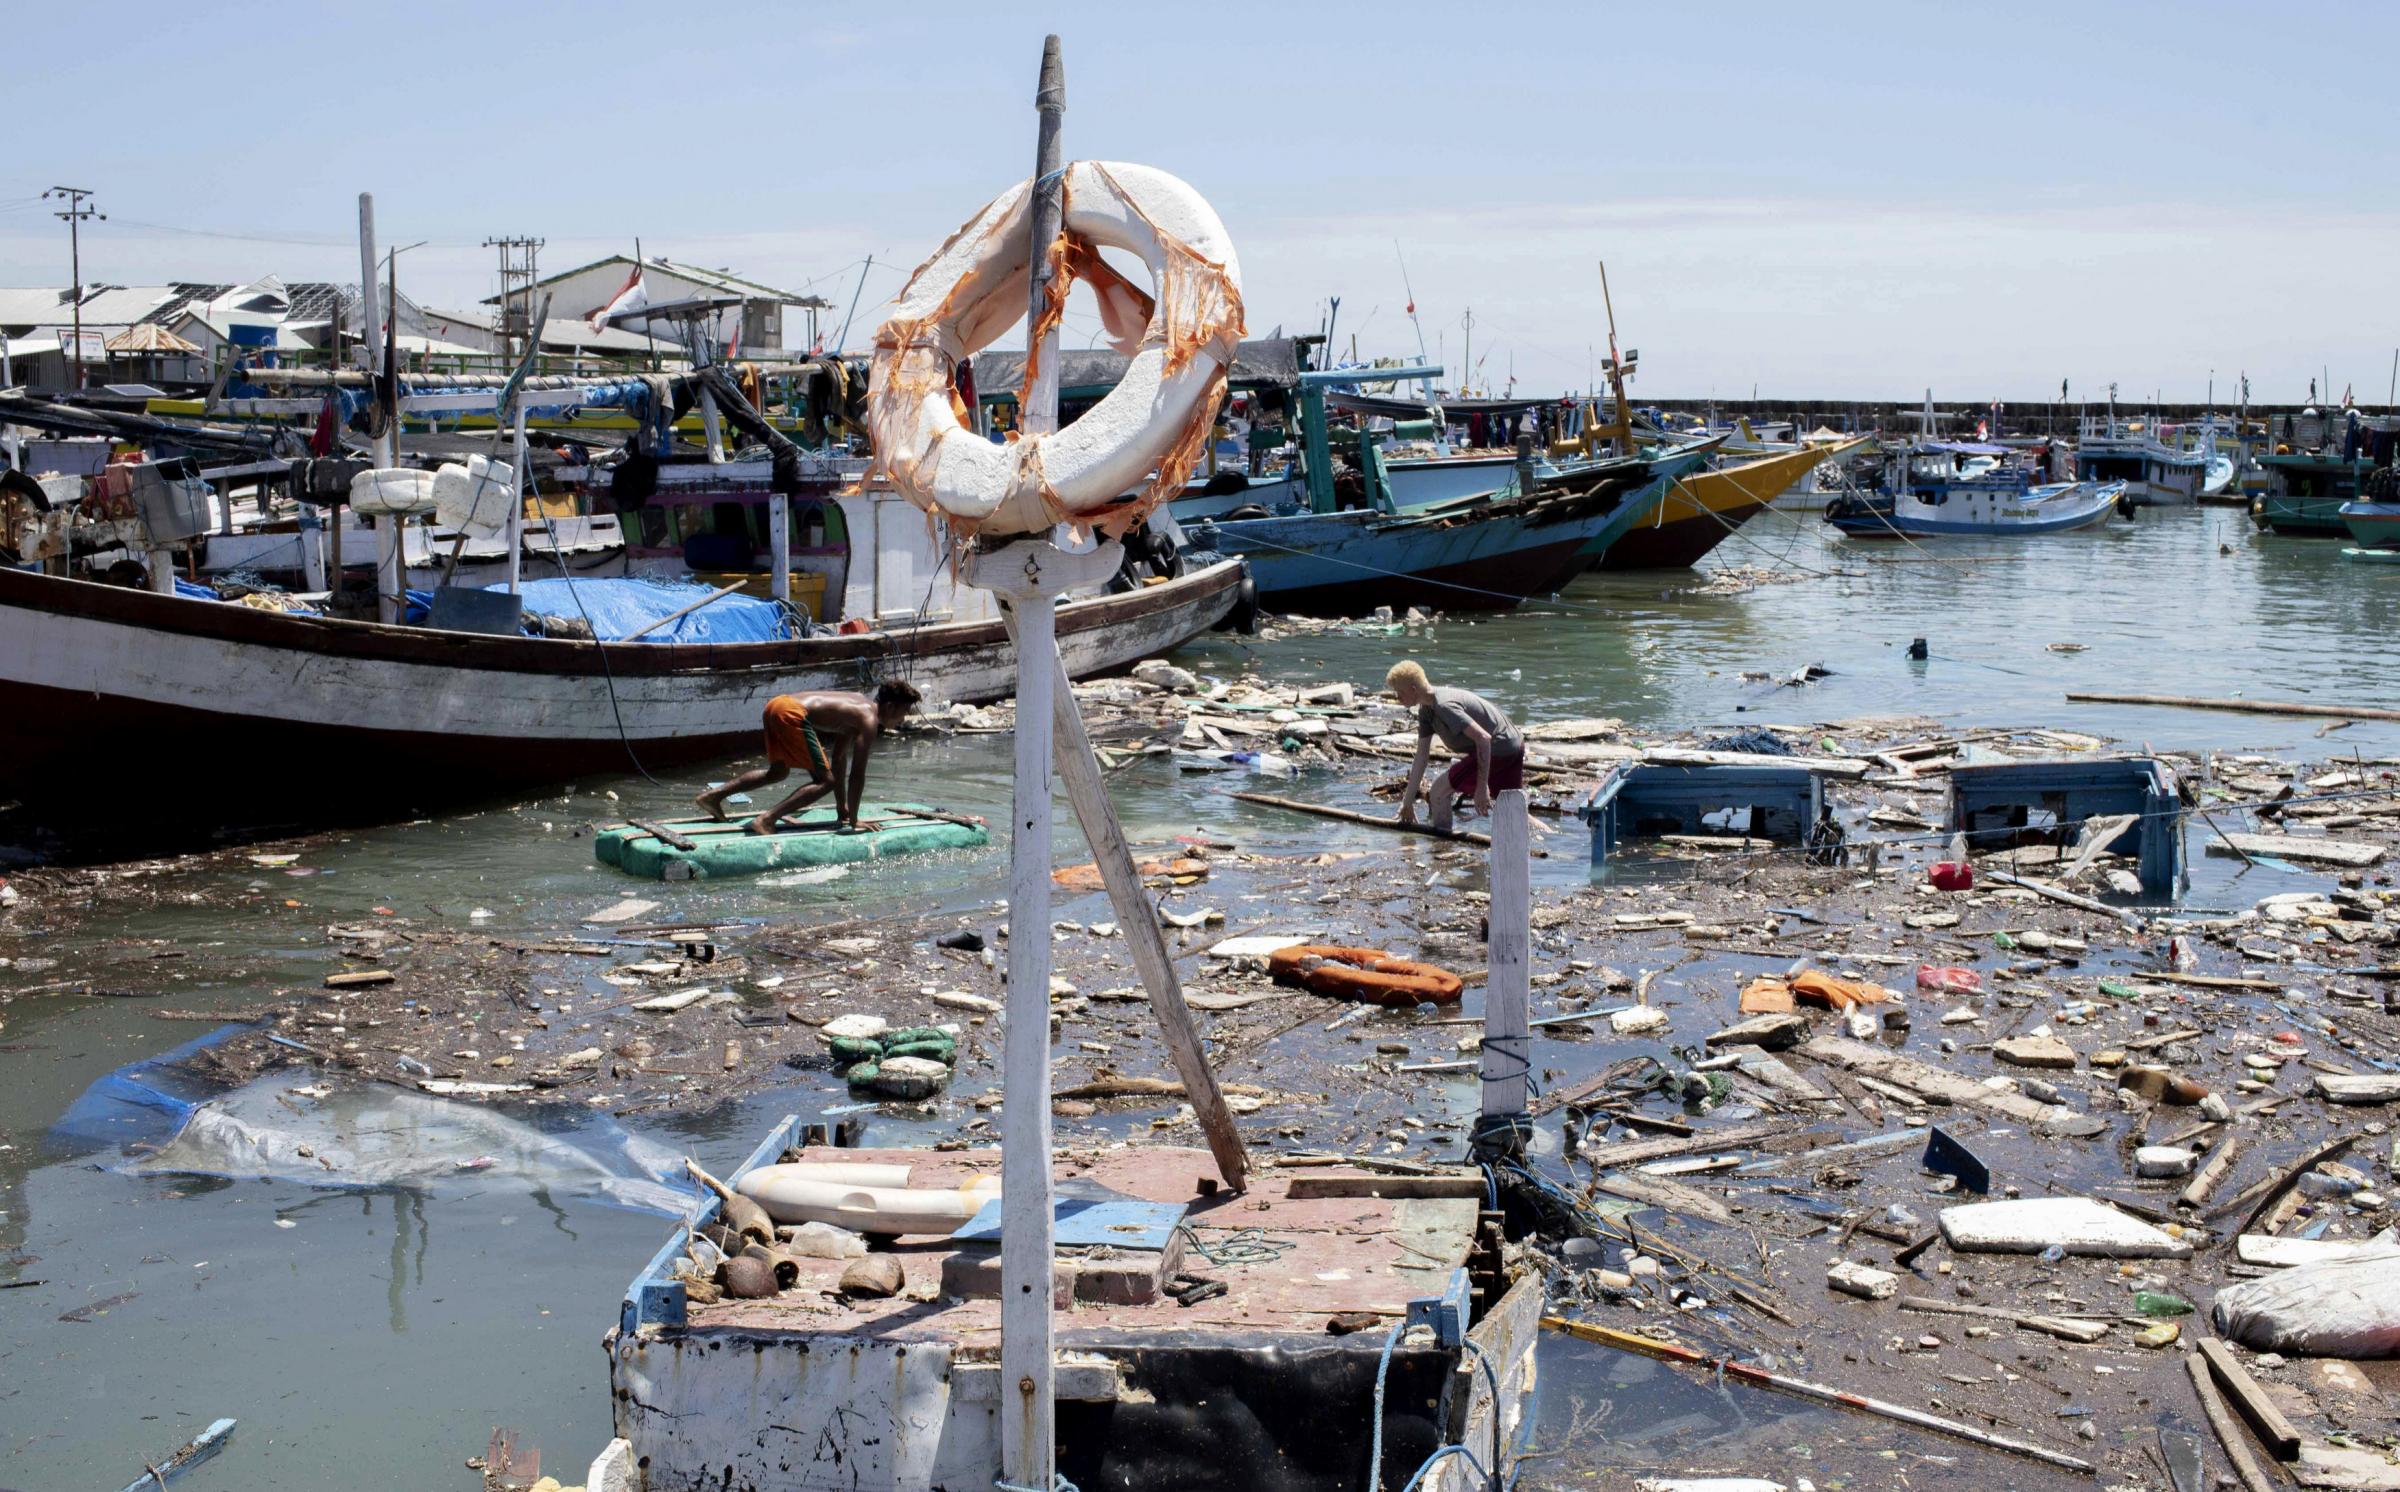 Indonesian men look for salvageable items amid debris and damaged boats following a storm at a port in Kupang, East Nusa Tenggara province, Indonesia Picture: ARMIN SEPTIEXAN/AP.